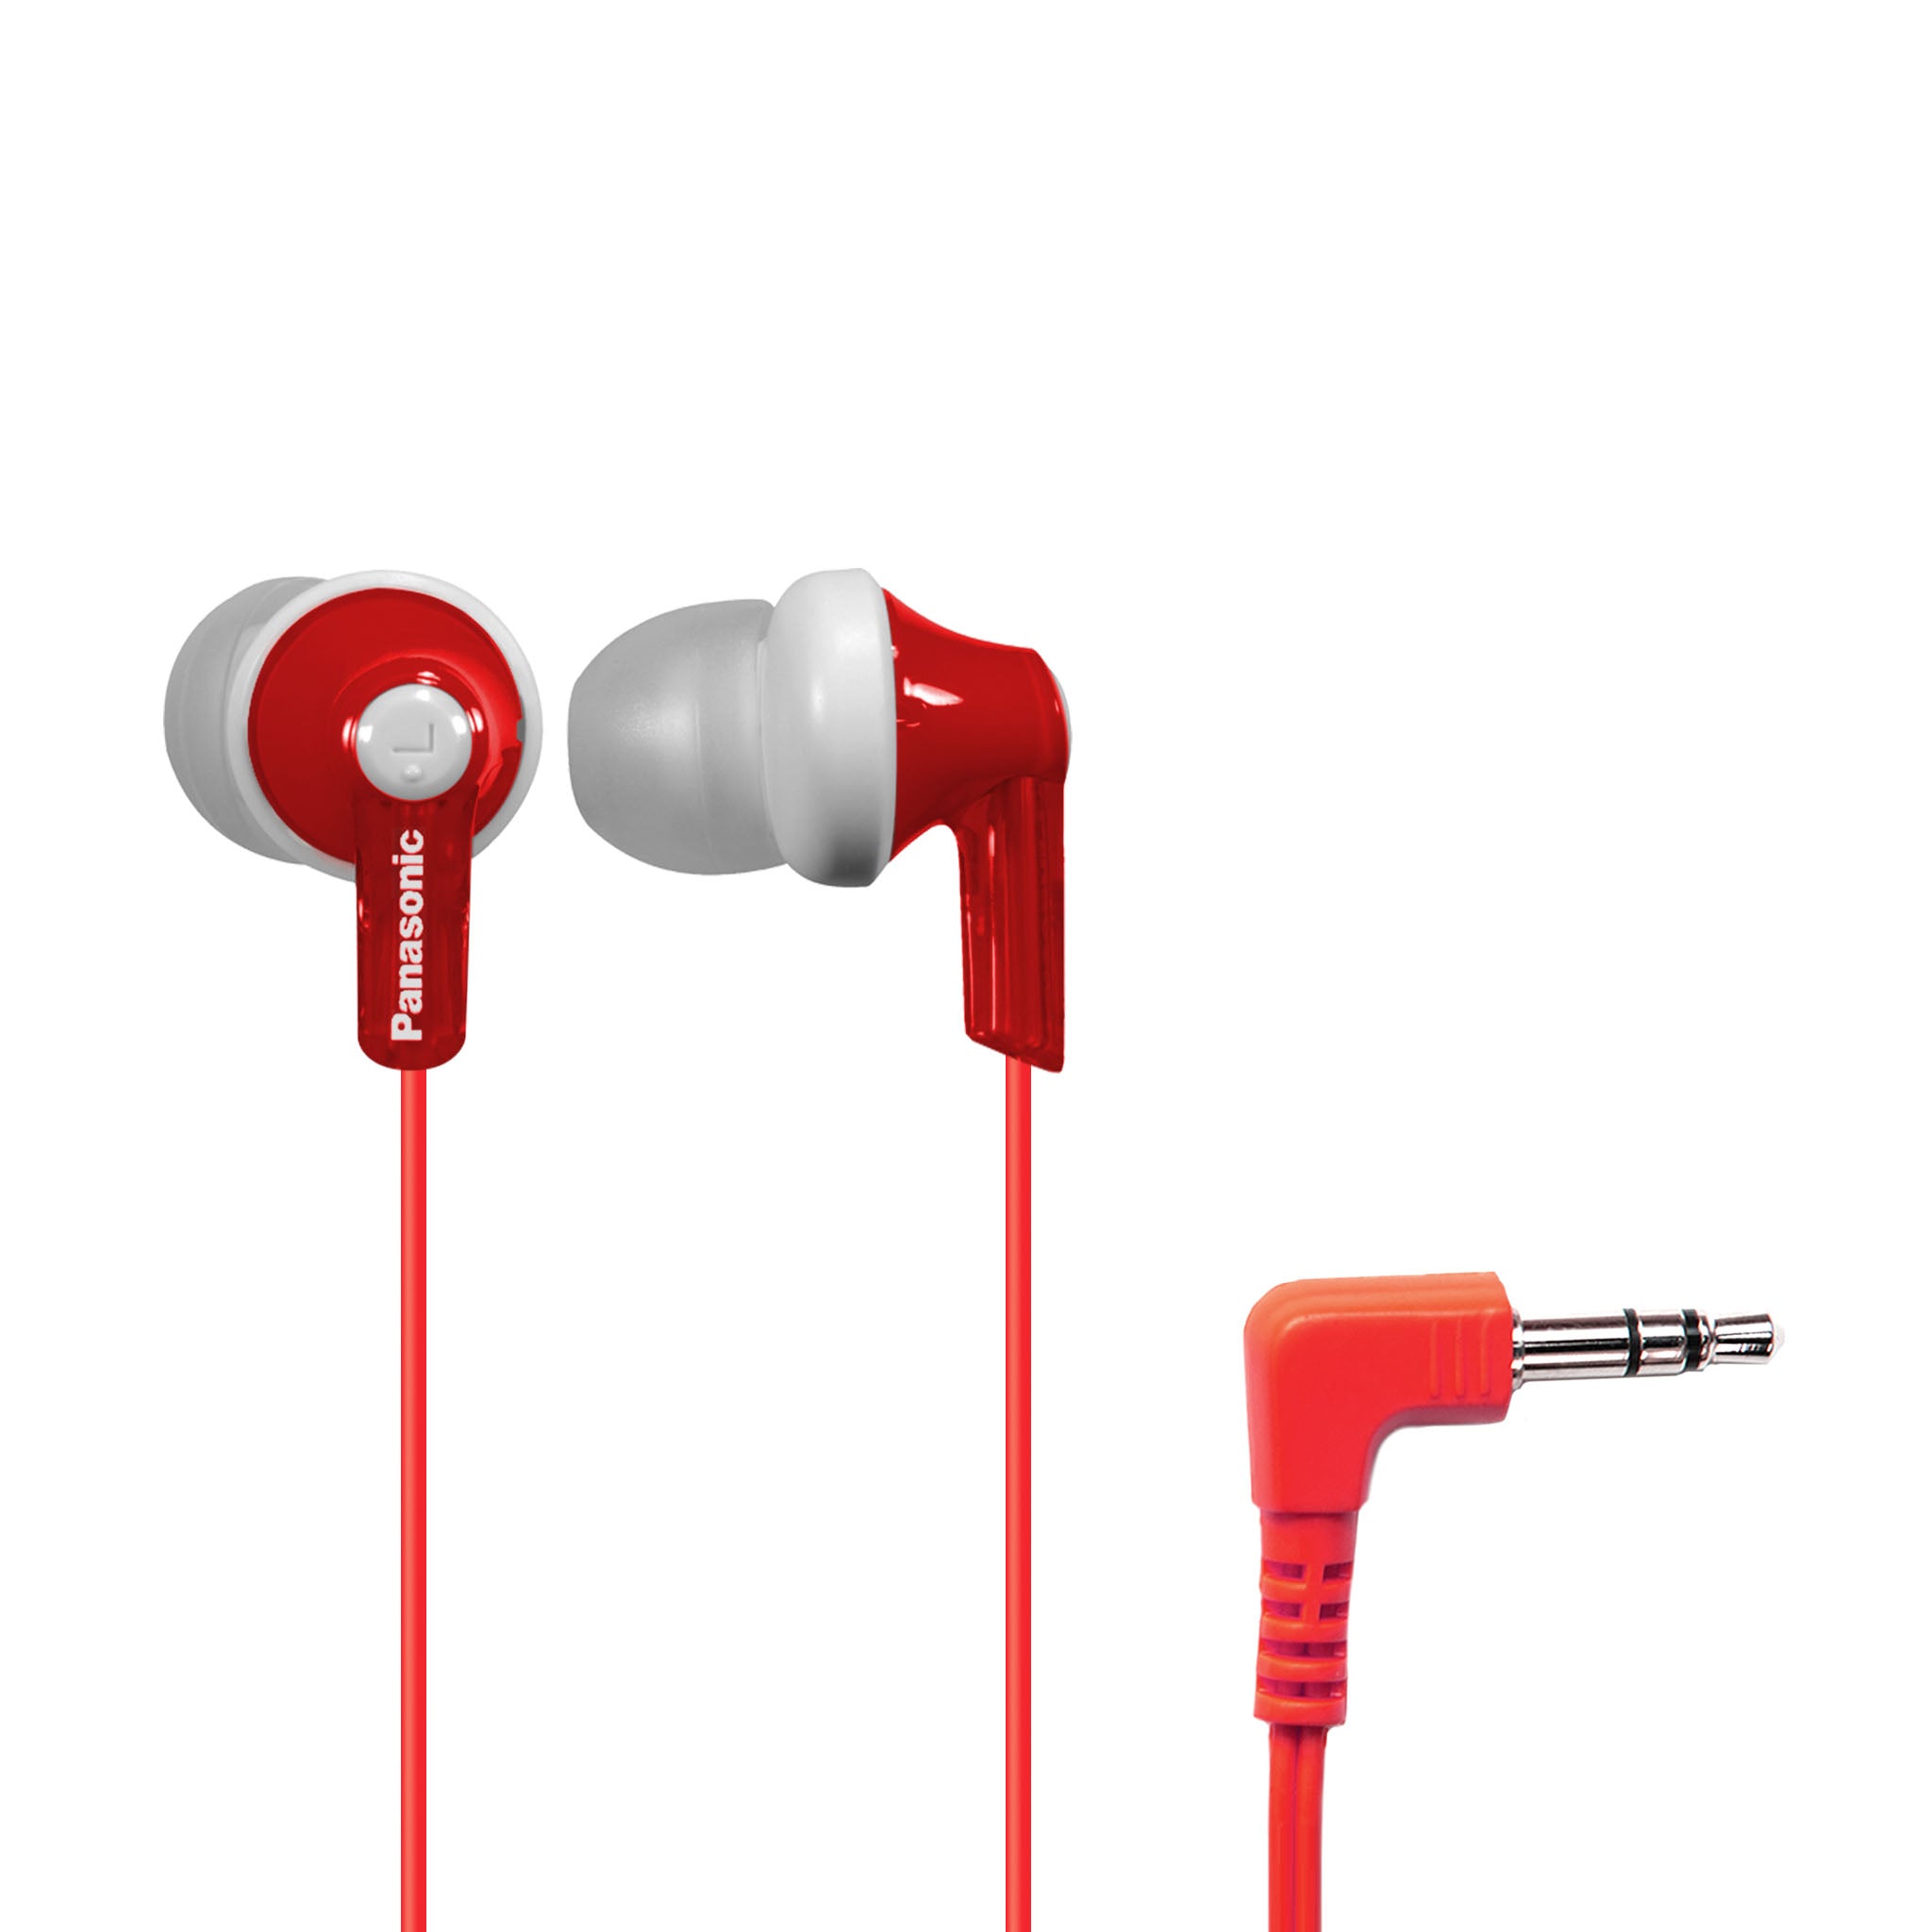 Panasonic ErgoFit In-Ear Earbud Laptops and RP-HJE120 3.5mm Jack - Headphones Phones with for